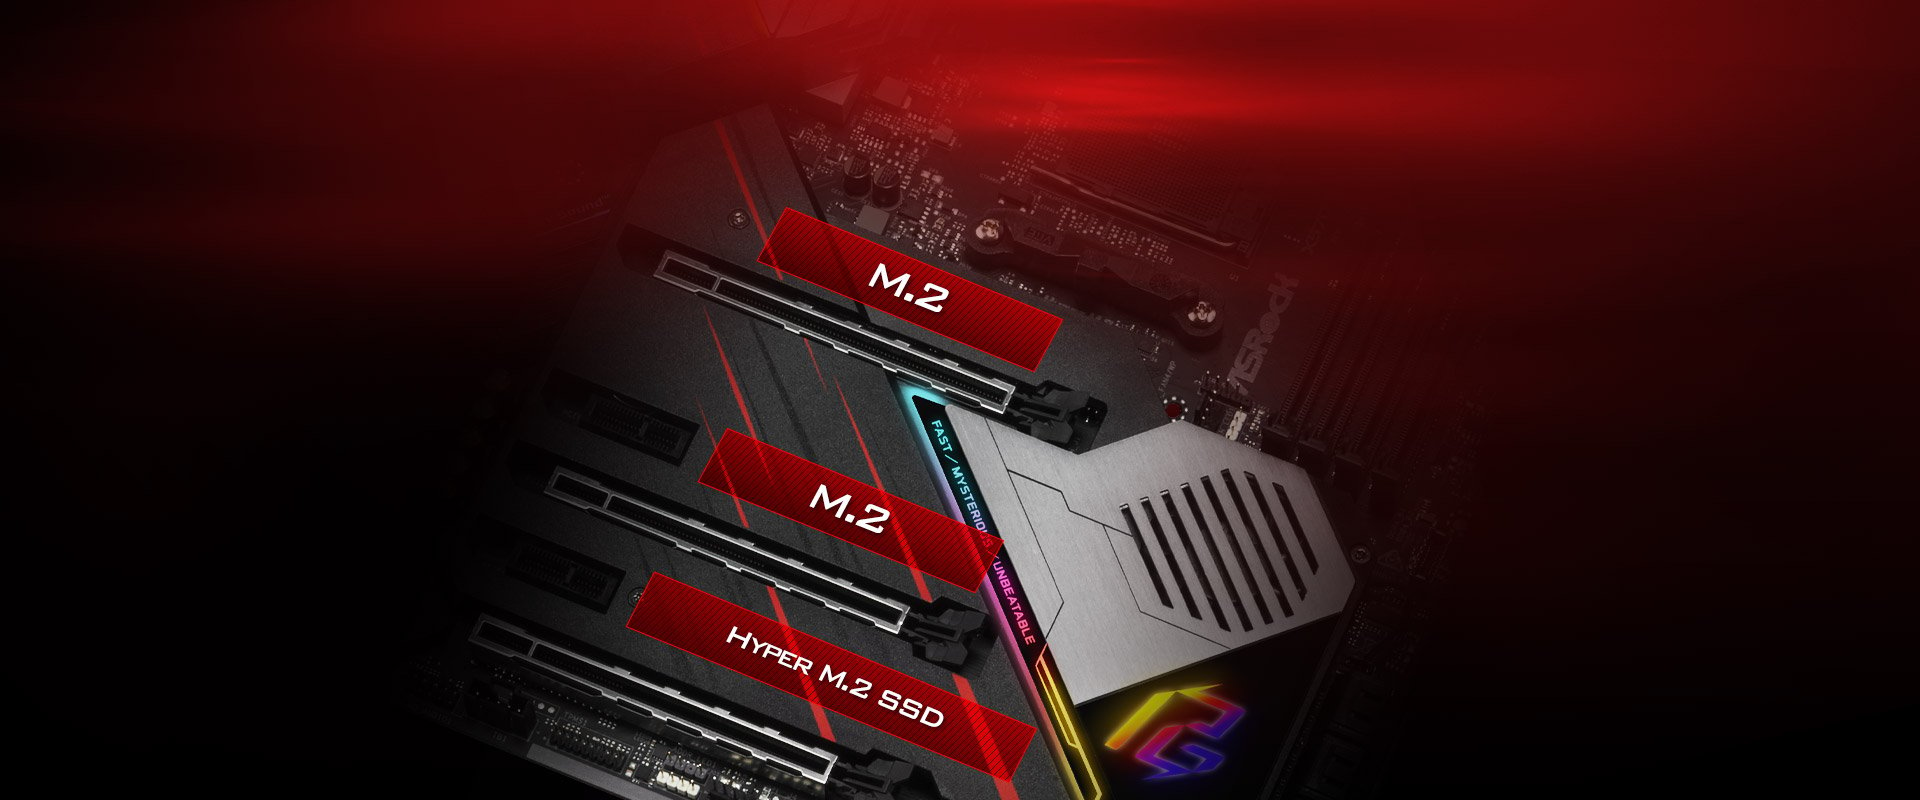 Highlight graphic showing the three M.2 slots on the ASRock X570 Phantom Gaming X Motherboard, with the third bottom one being Hyper M.2